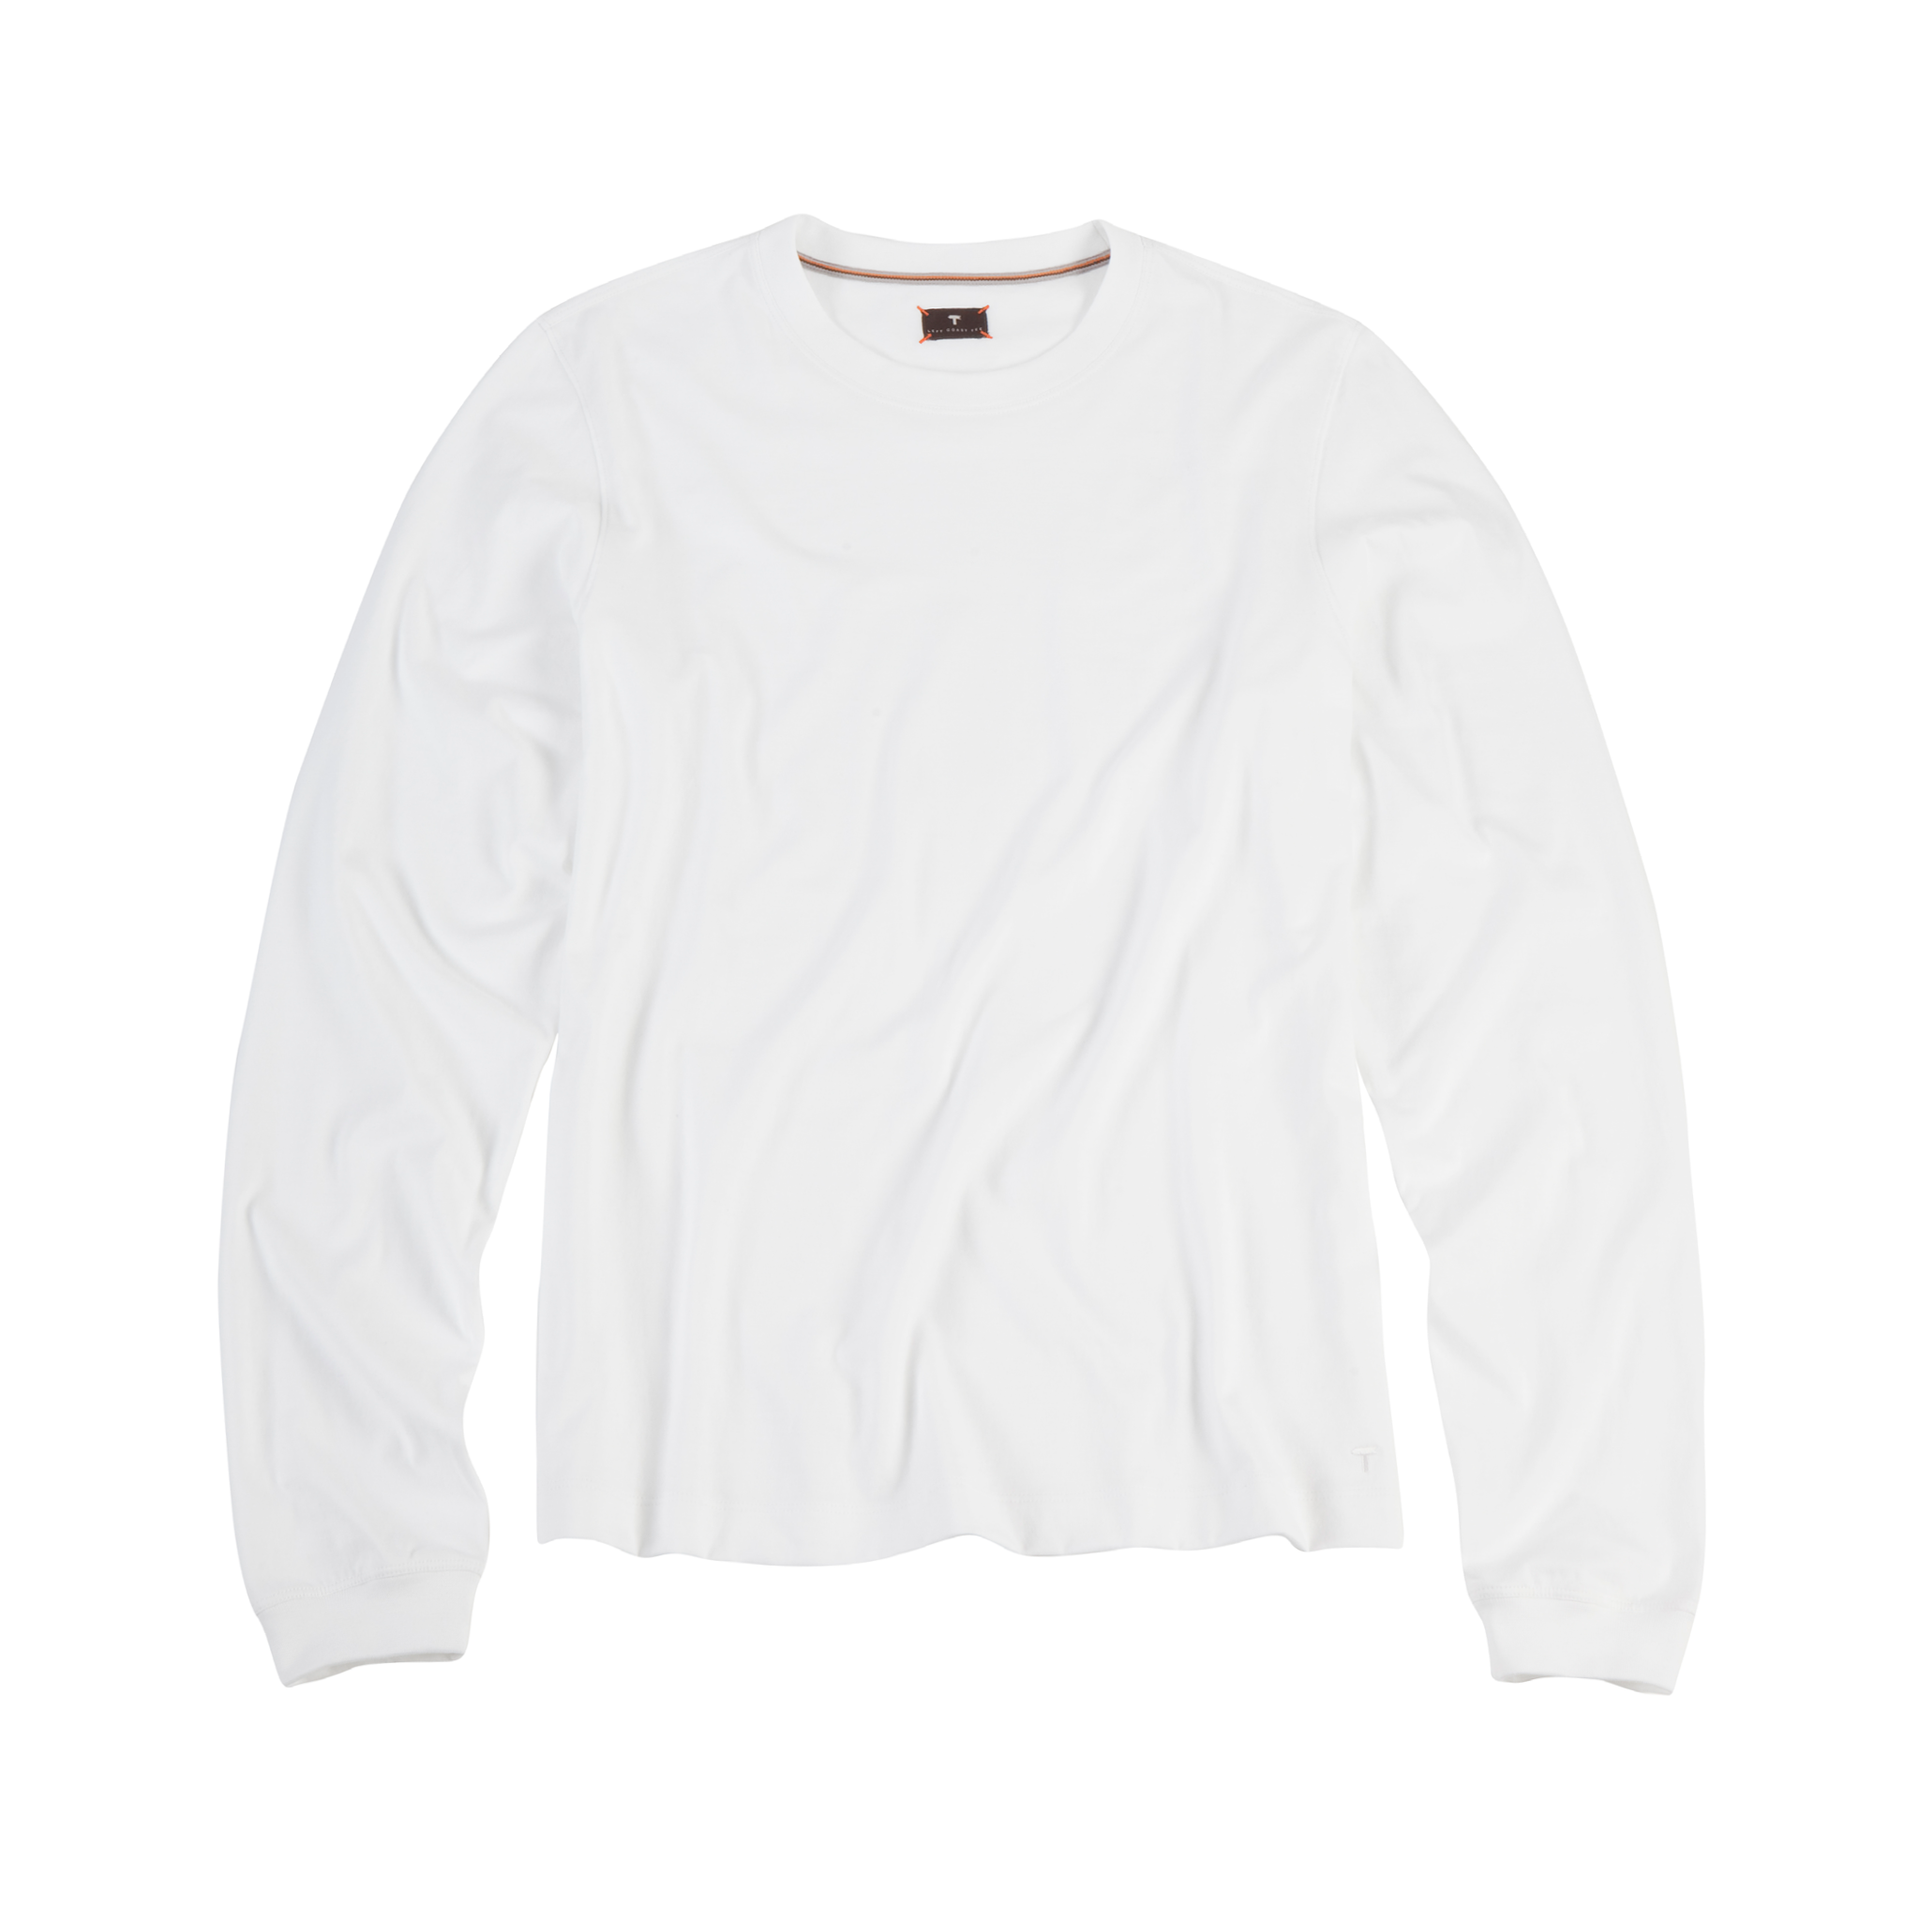 Long Sleeve Crew Neck Peruvian Cotton Tee Shirt in White by Left Coast Tee